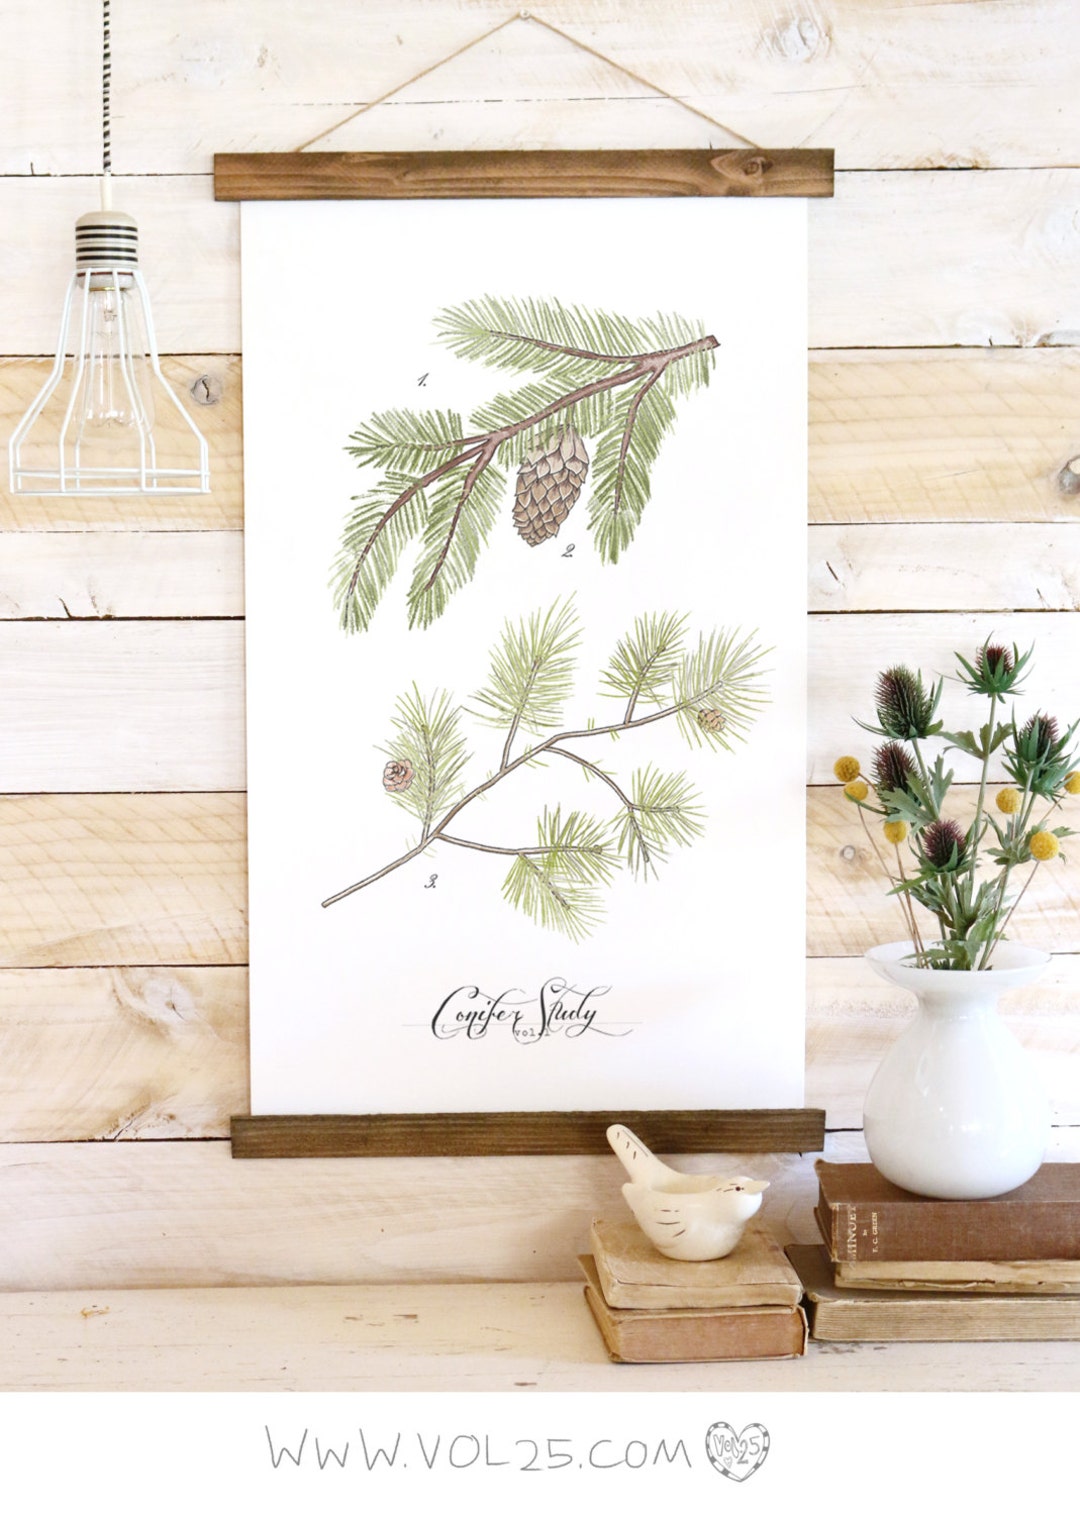 Conifer Study Pine Sprigs Canvas Wall Hanging Wood Trim - Etsy